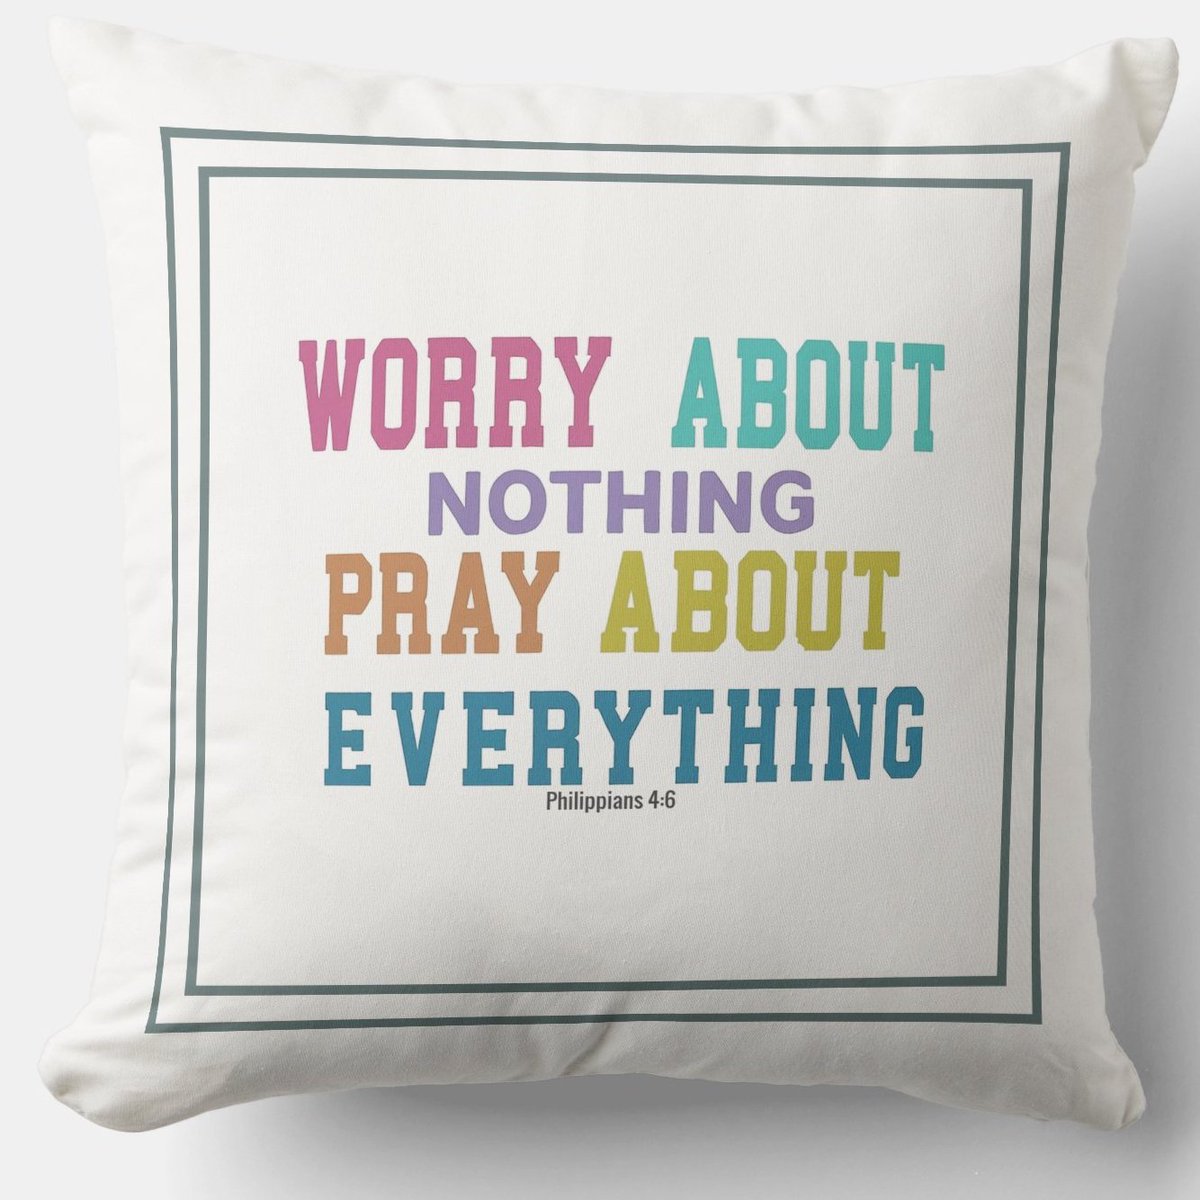 Worry About Nothing Pray About Everything zazzle.com/worry_about_no… #Pillow #Blessing #JesusChrist #JesusSaves #Jesus #christian #spiritual #Homedecoration #uniquegift #giftideas #MothersDayGifts #giftformom #giftidea #HolySpirit #pillows #giftshop #giftsforher #giftsformom #prayer